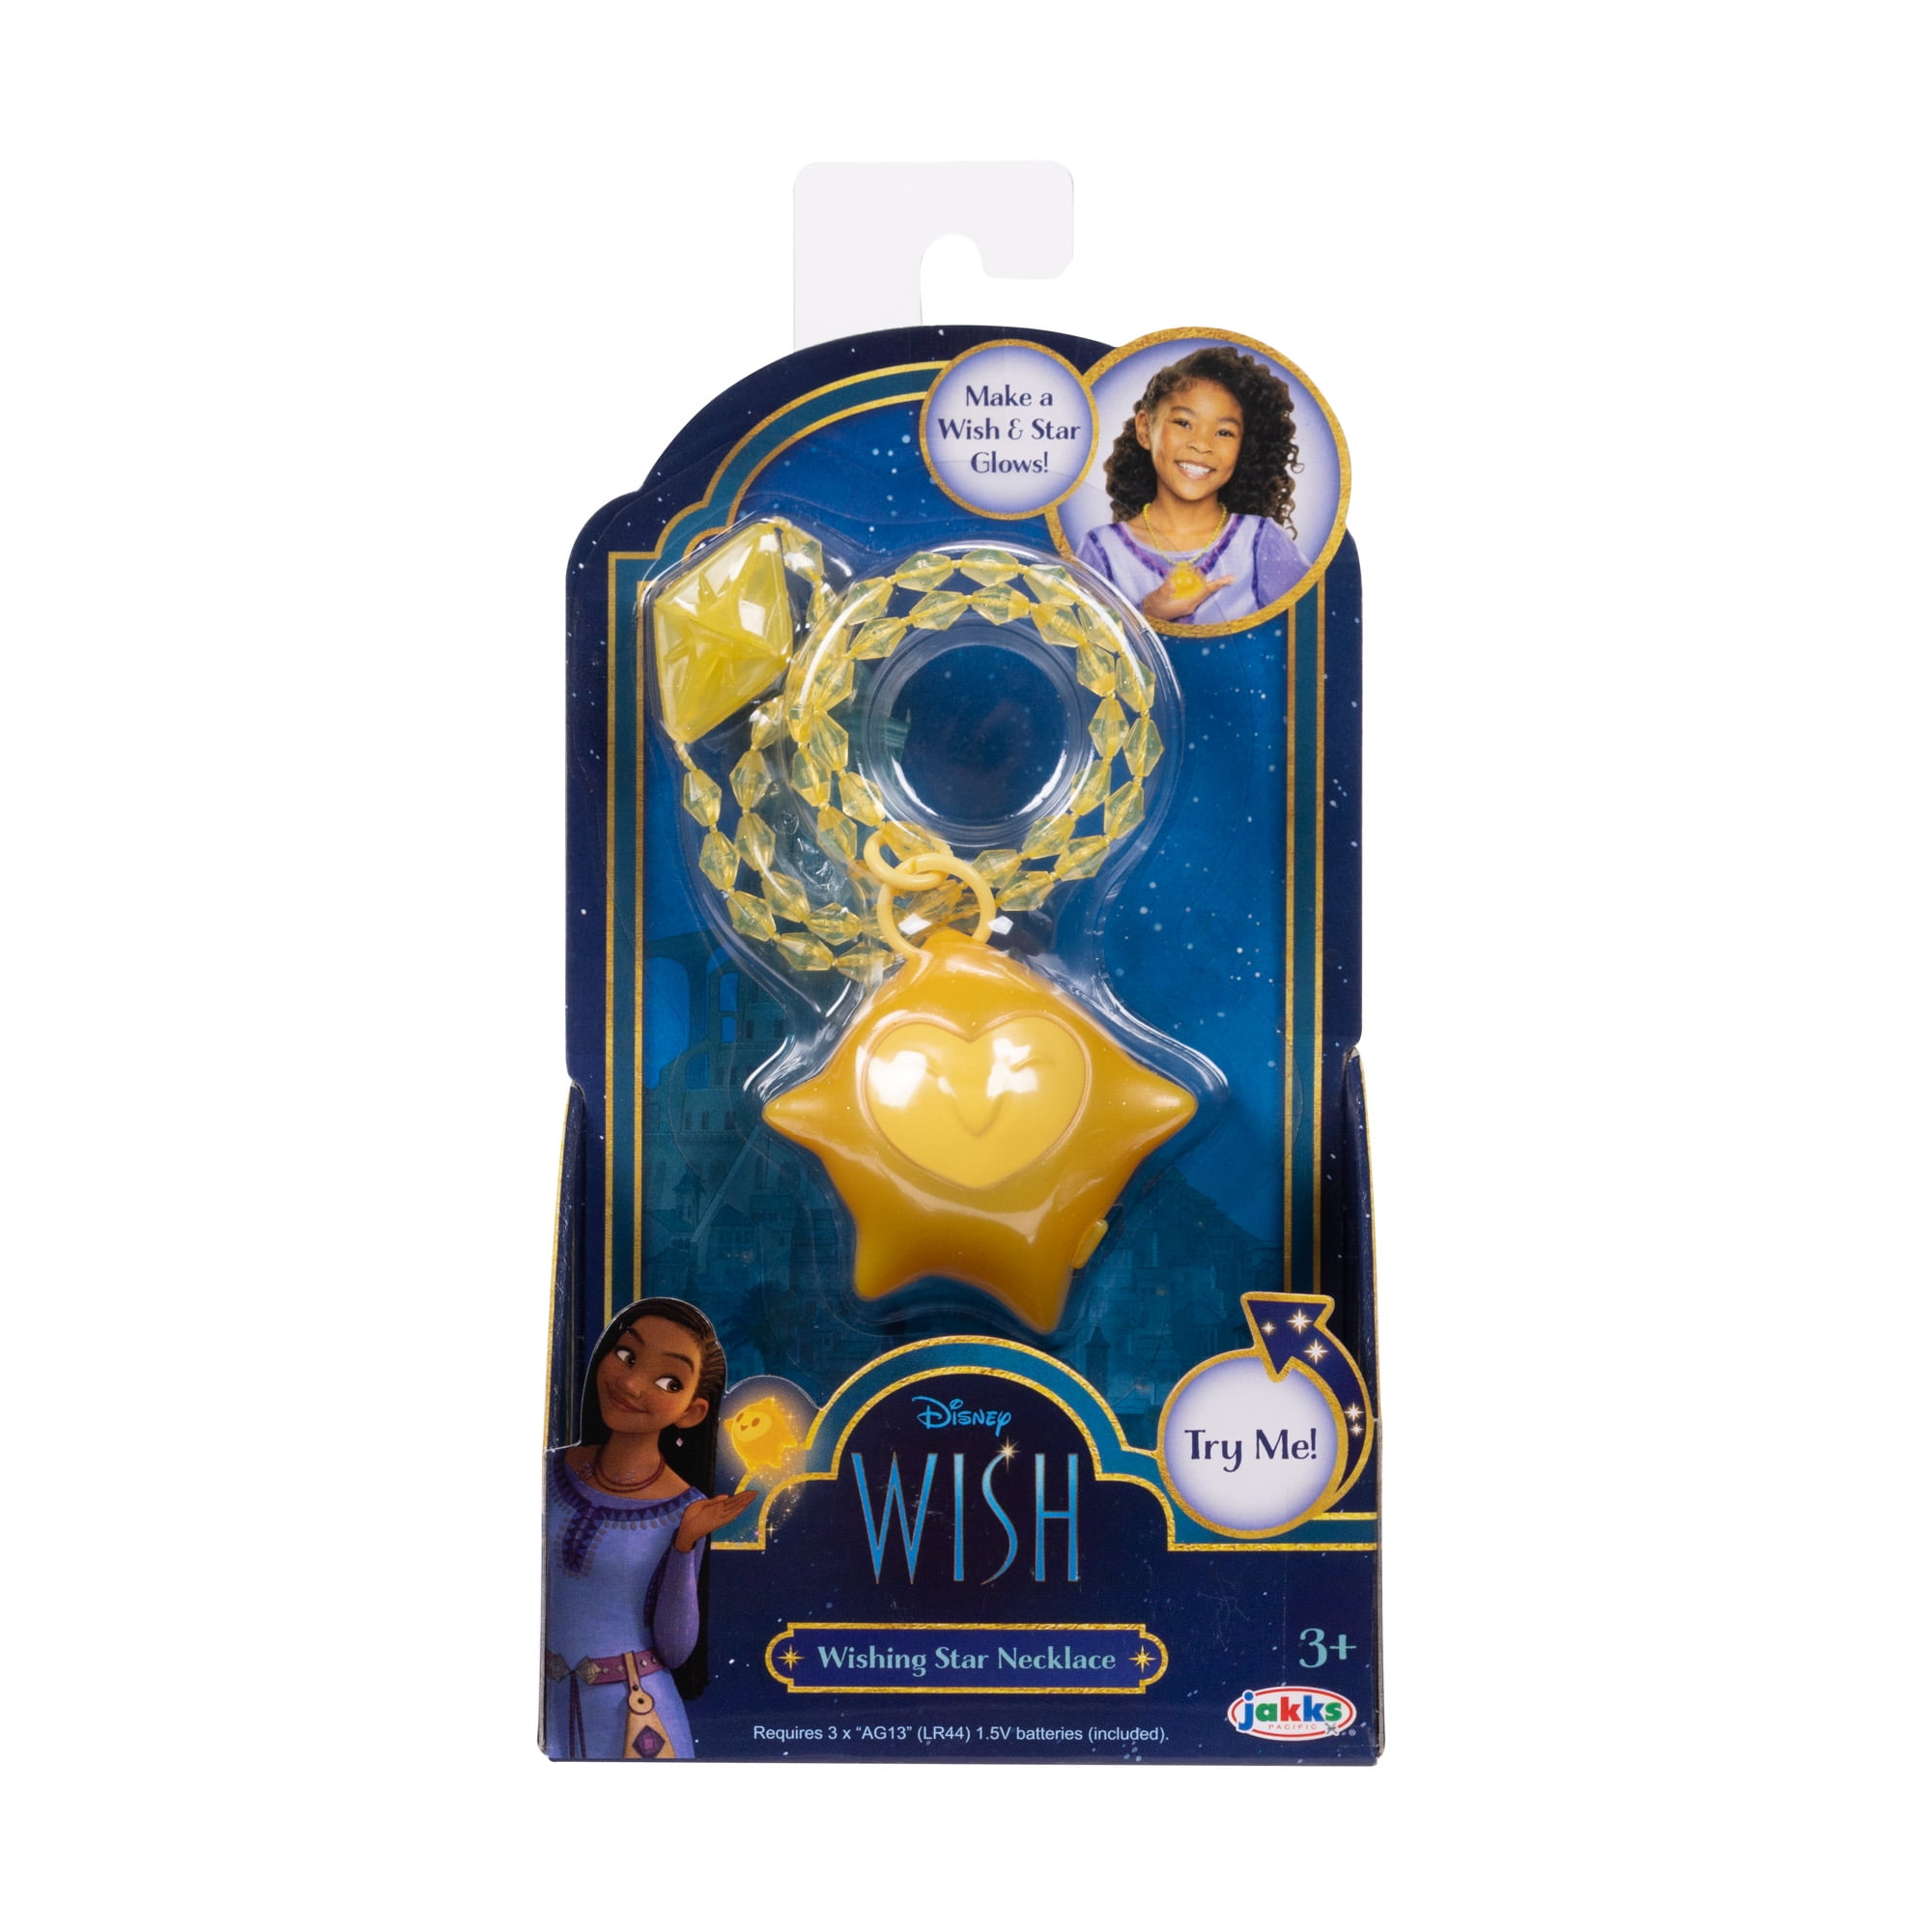 Disney Wish Wishing Light up Star Necklace Costume Accessory for Children  Ages 3 to 6